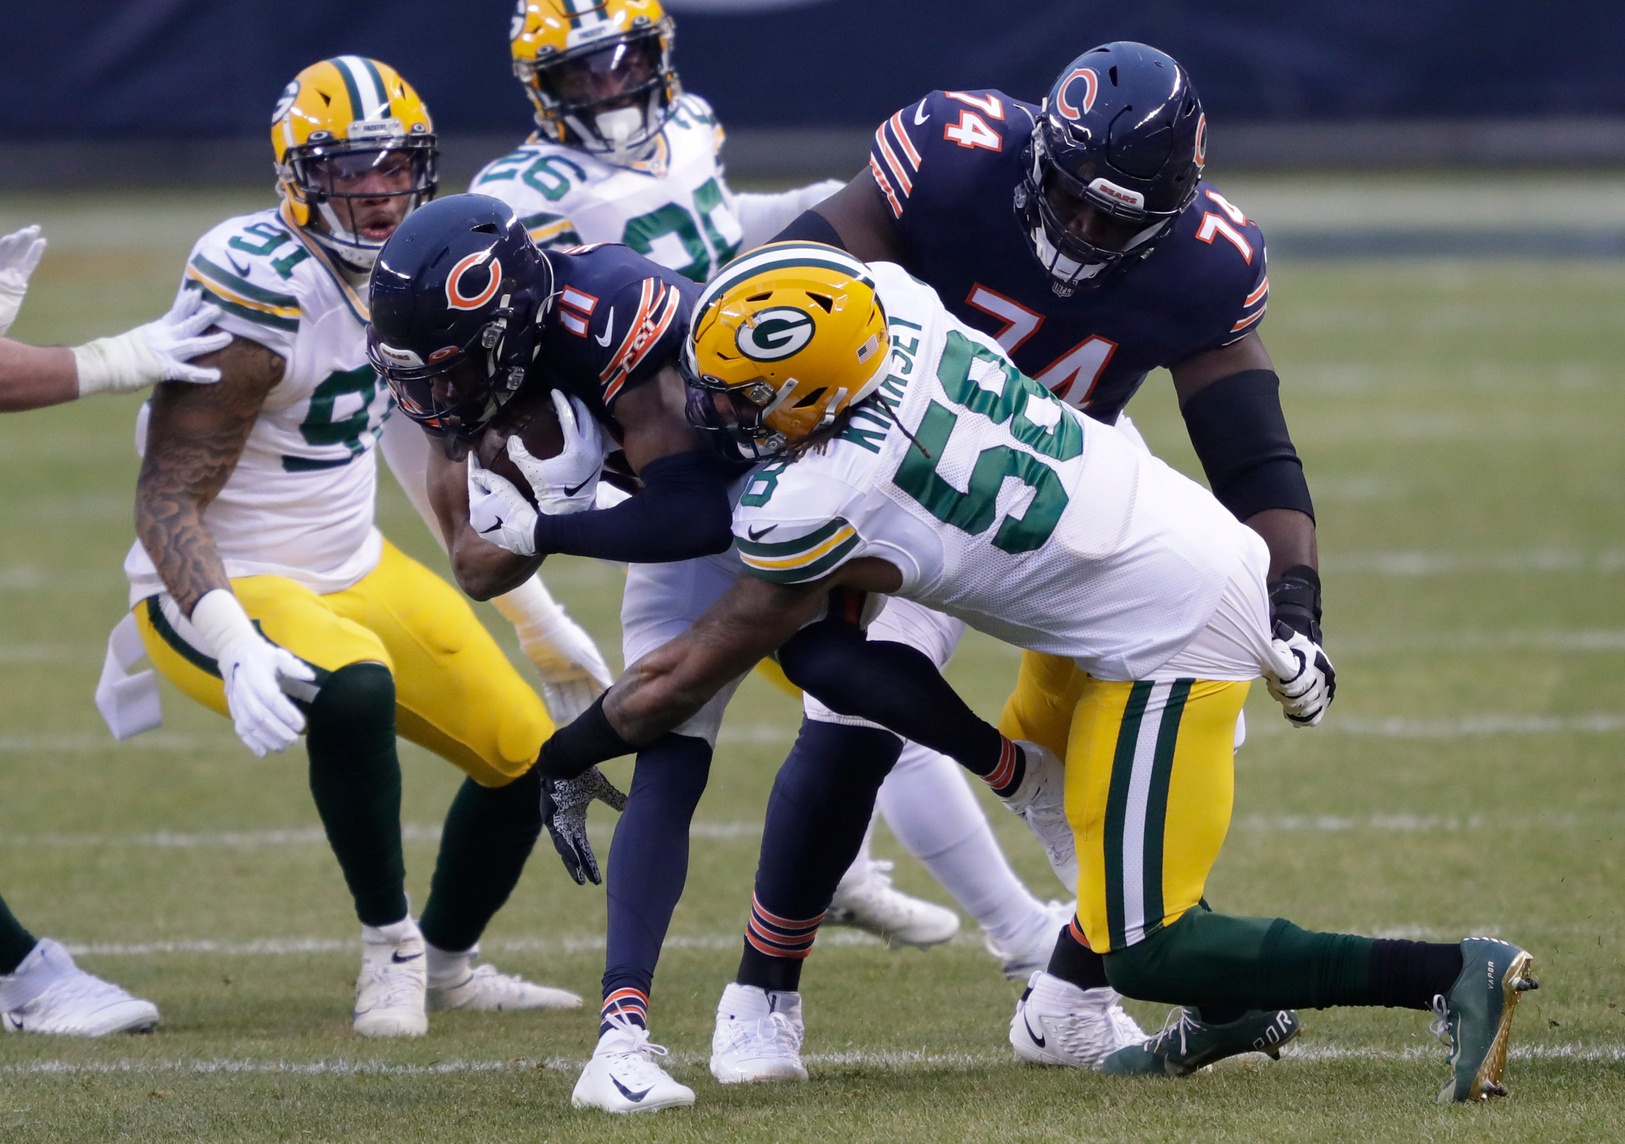 Former Green Bay Packers linebacker Christian Kirksey was released by the Houston Texans (NFL)